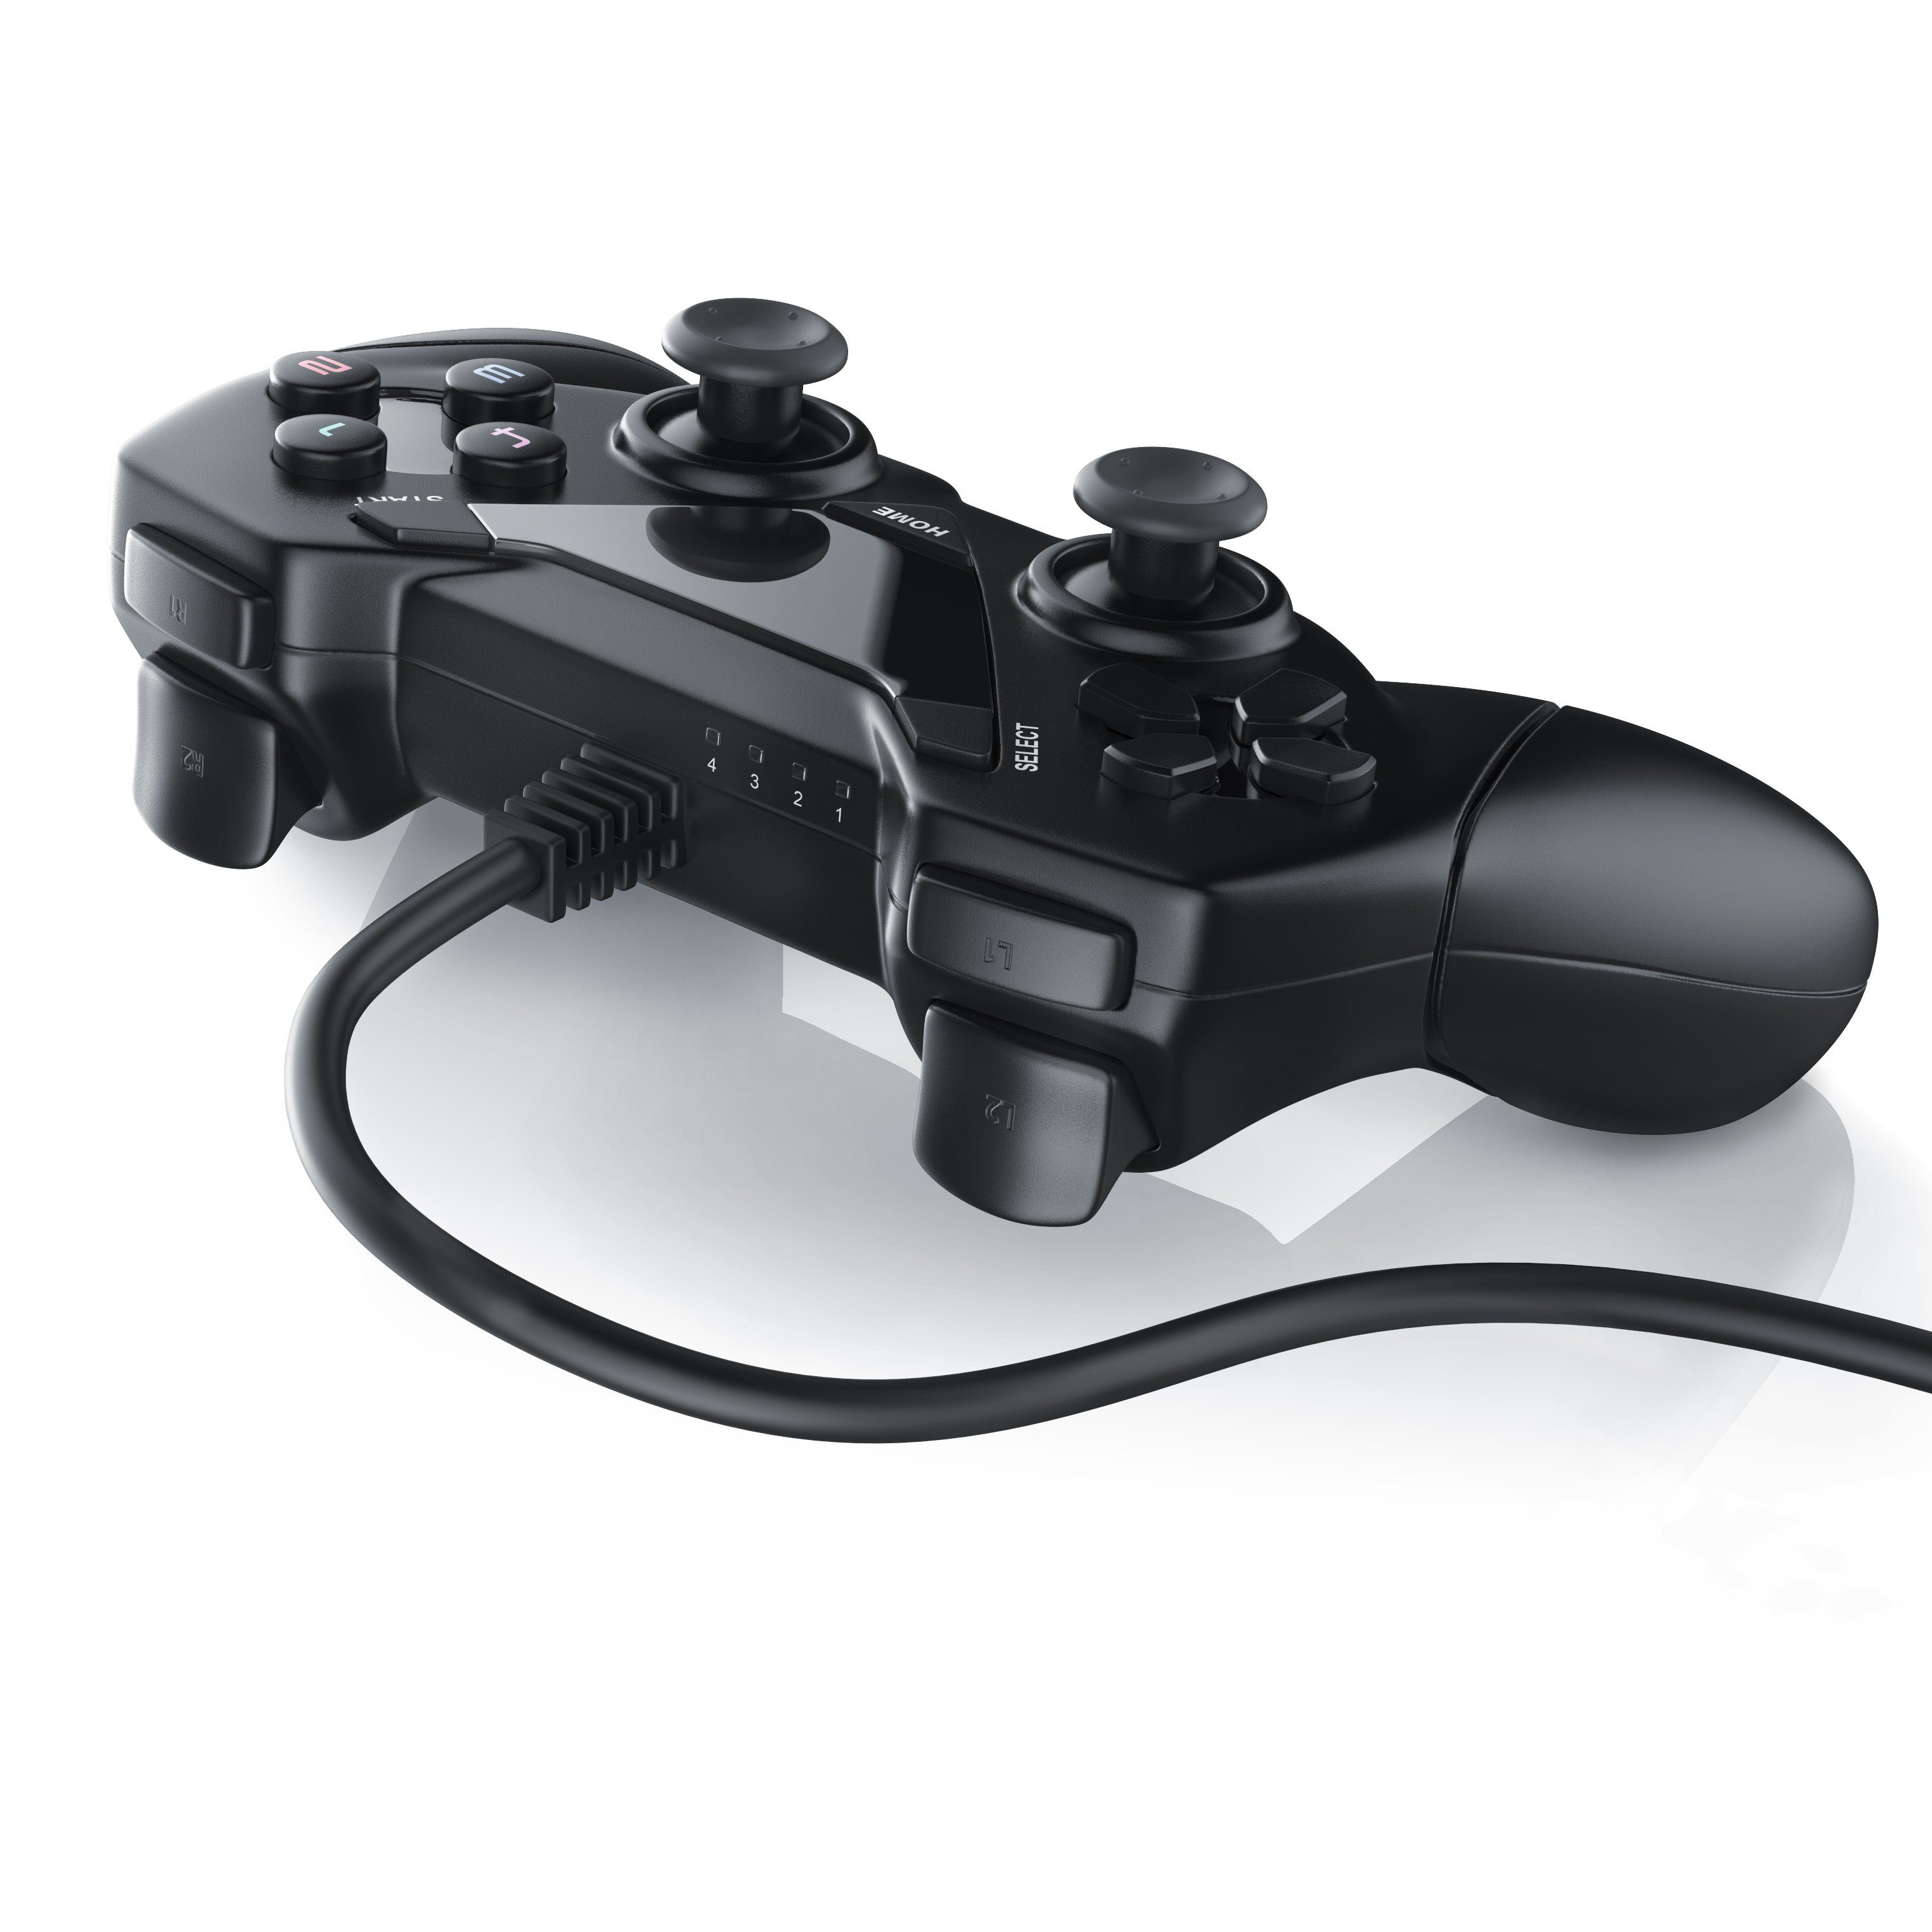 CSL PlayStation-Controller Android, Controller / für X-Input) / PS3 USB / Direct-Input St., (1 PC